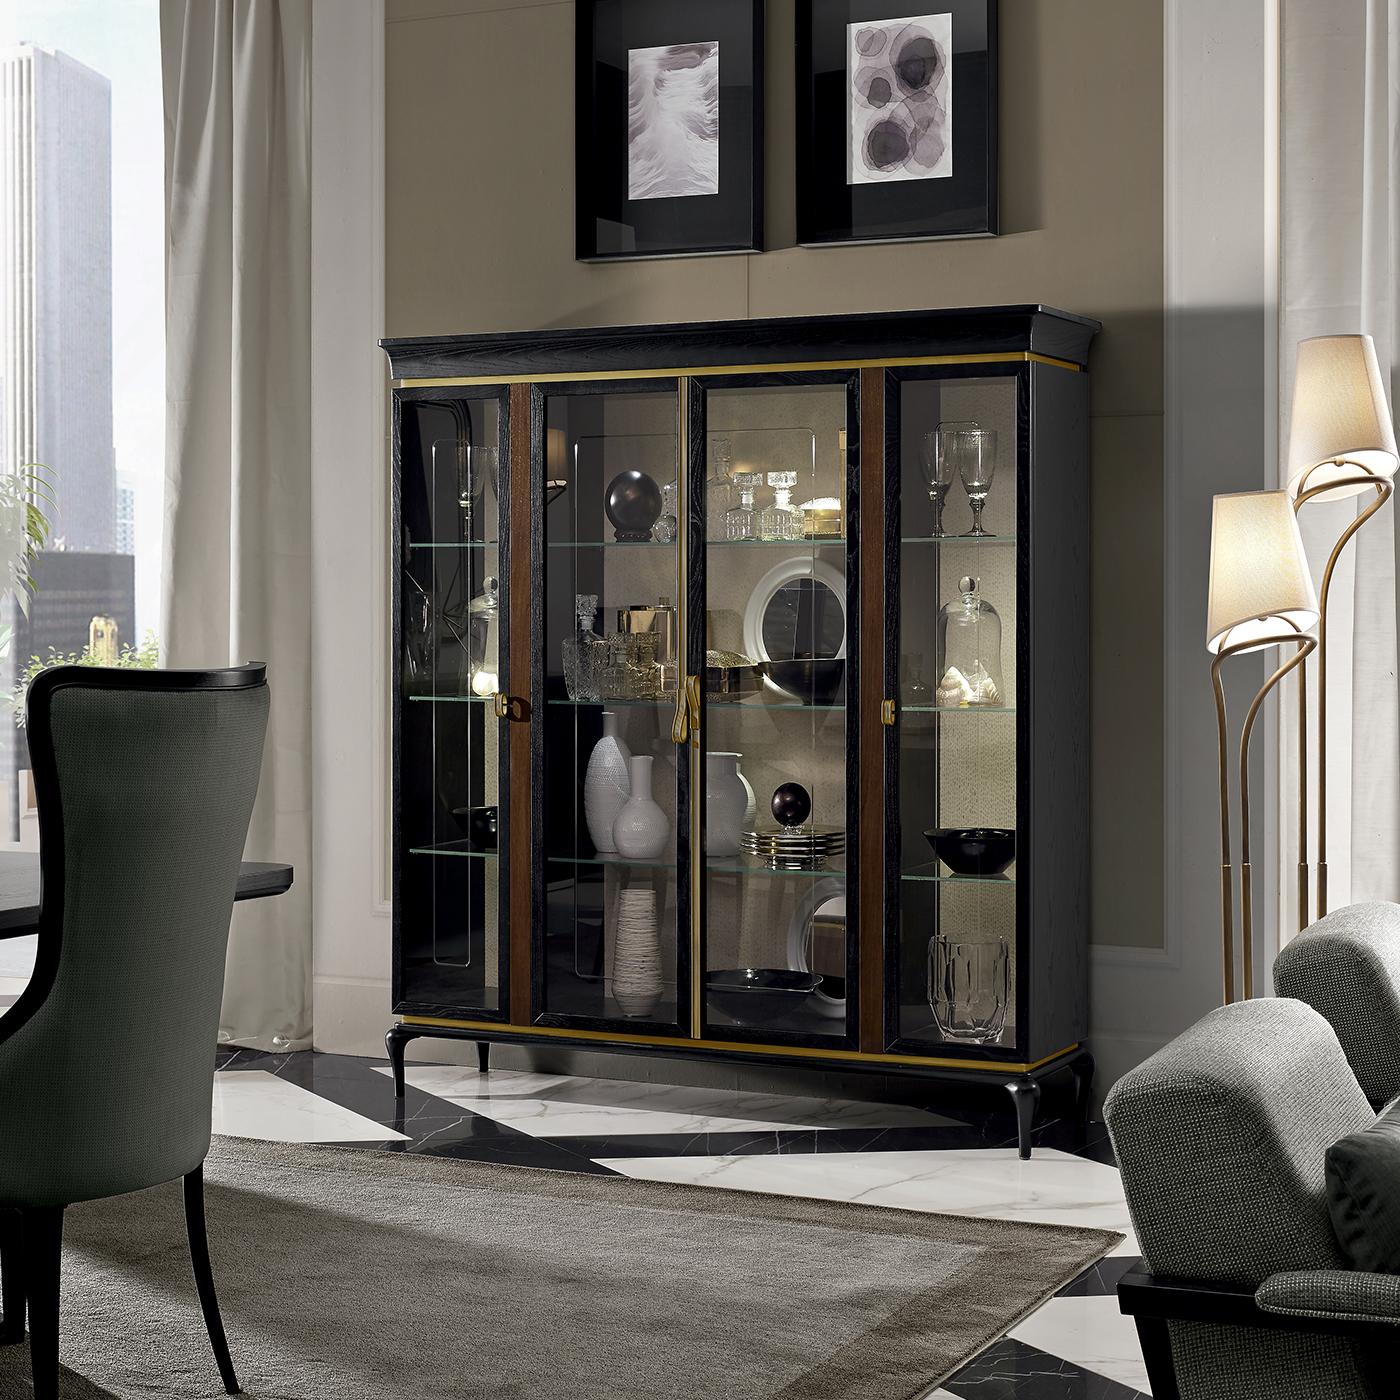 Plush sophistication and functionality merge harmoniously in this splendid four-door display cabinet. Durable and sturdy, this piece is made of Canaletto walnut-veneered MDF and plywood with a burnished brass profile, while its base is in solid ash